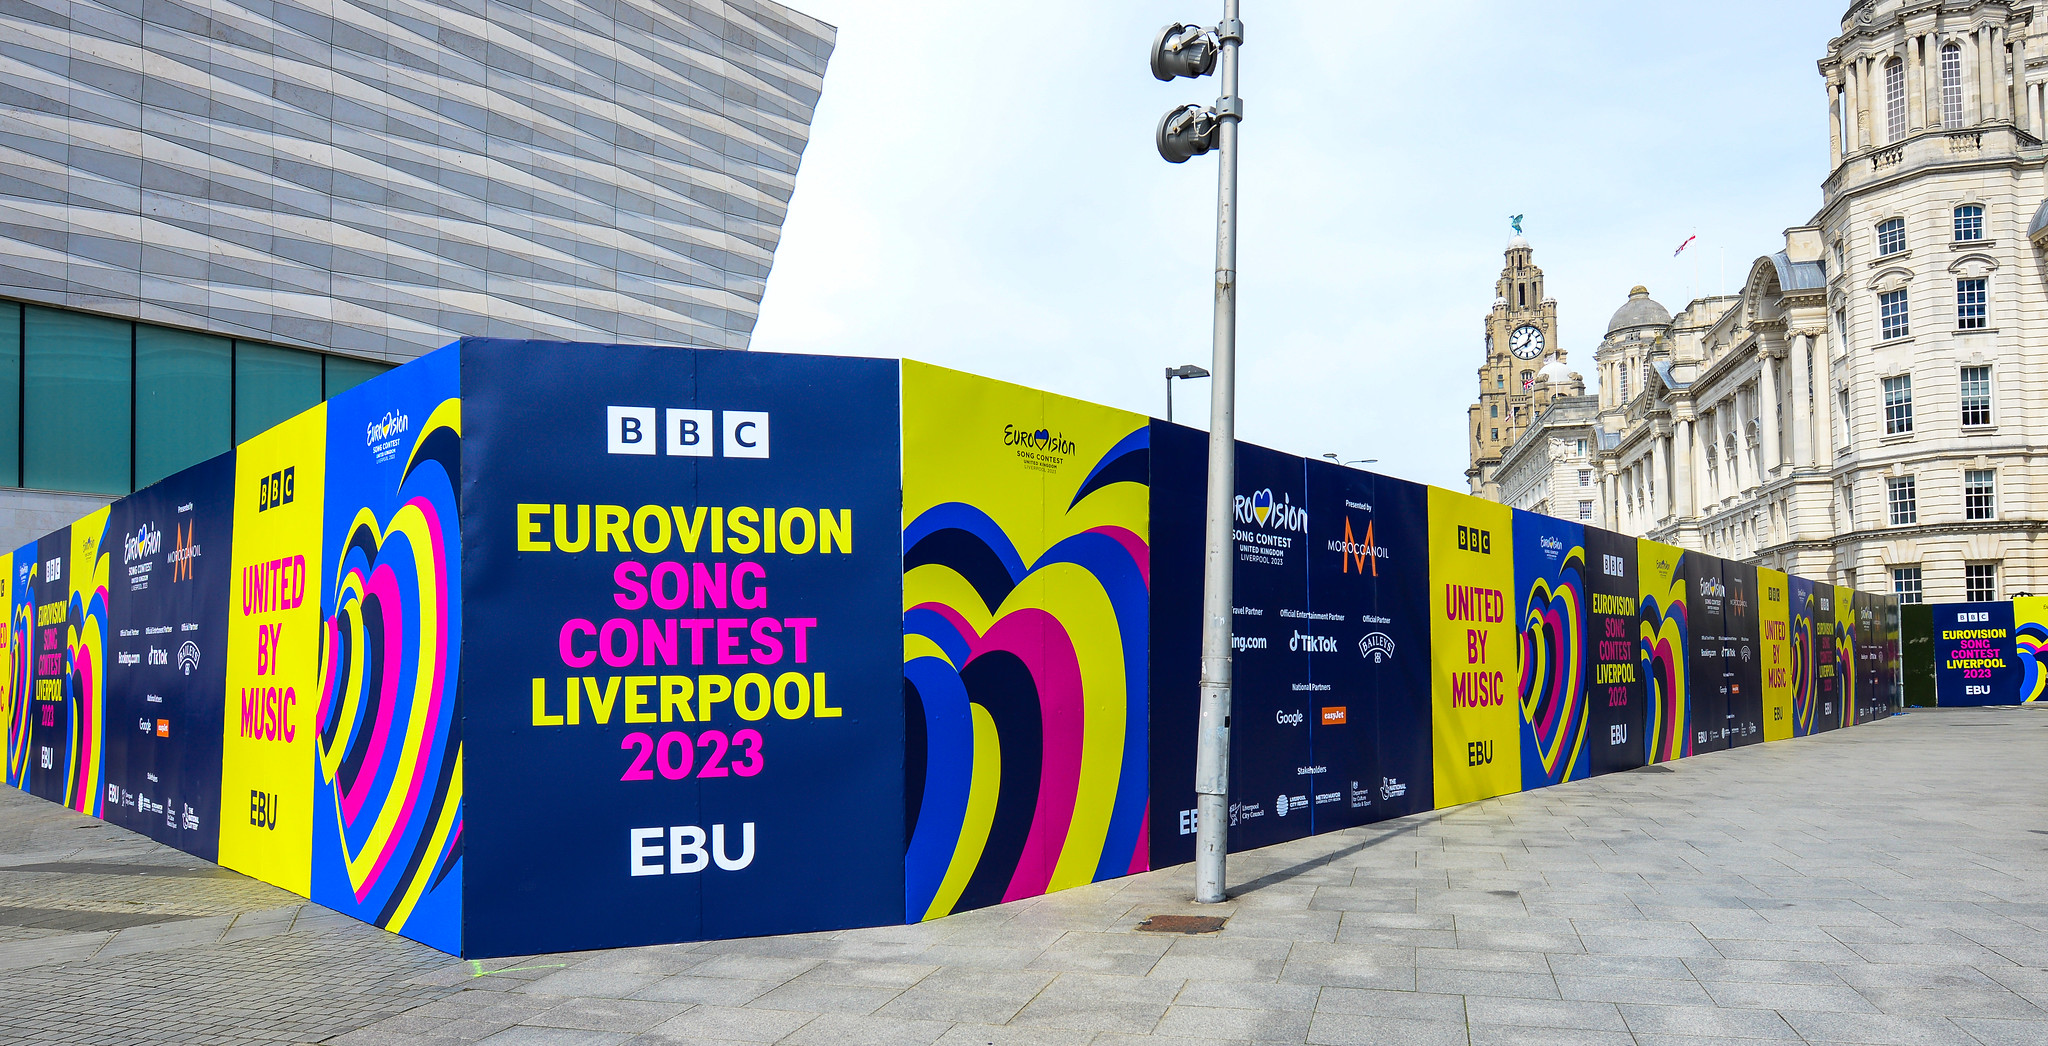 Eurovision 2023 Hoardings in Liverpool